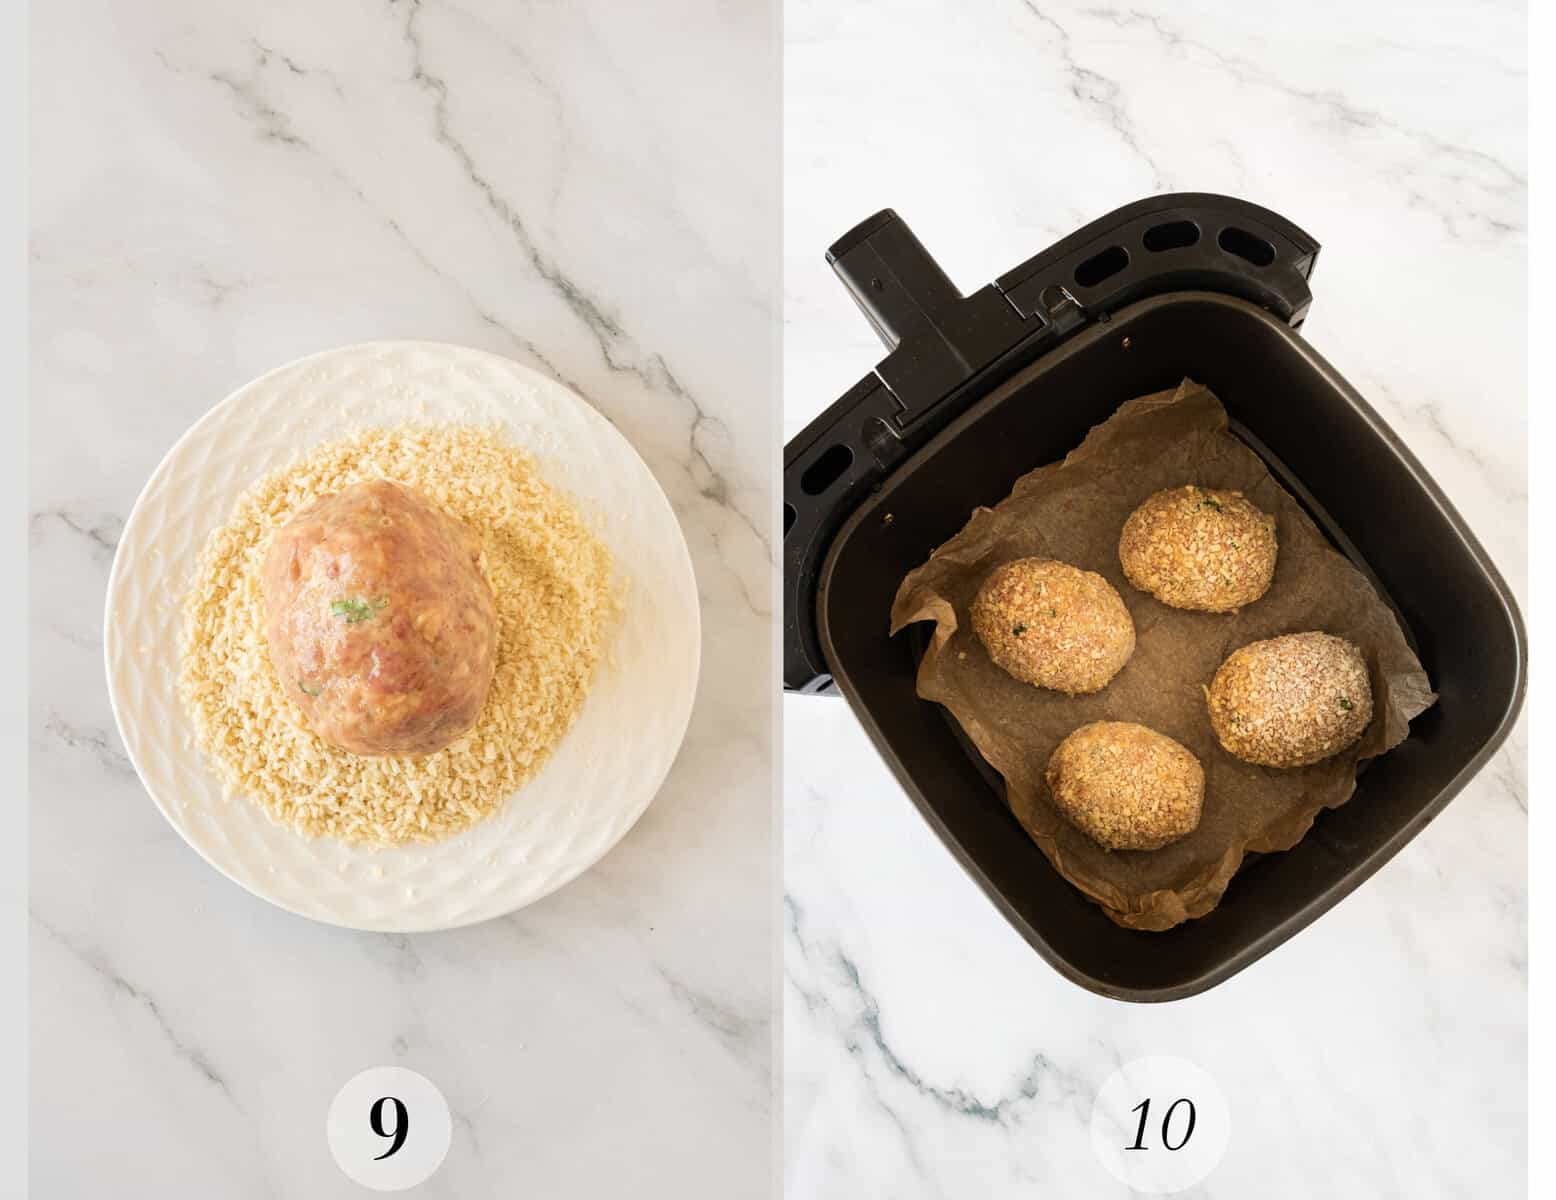 Process shots showing how to crumb and cook scotch eggs in an air-fryer.